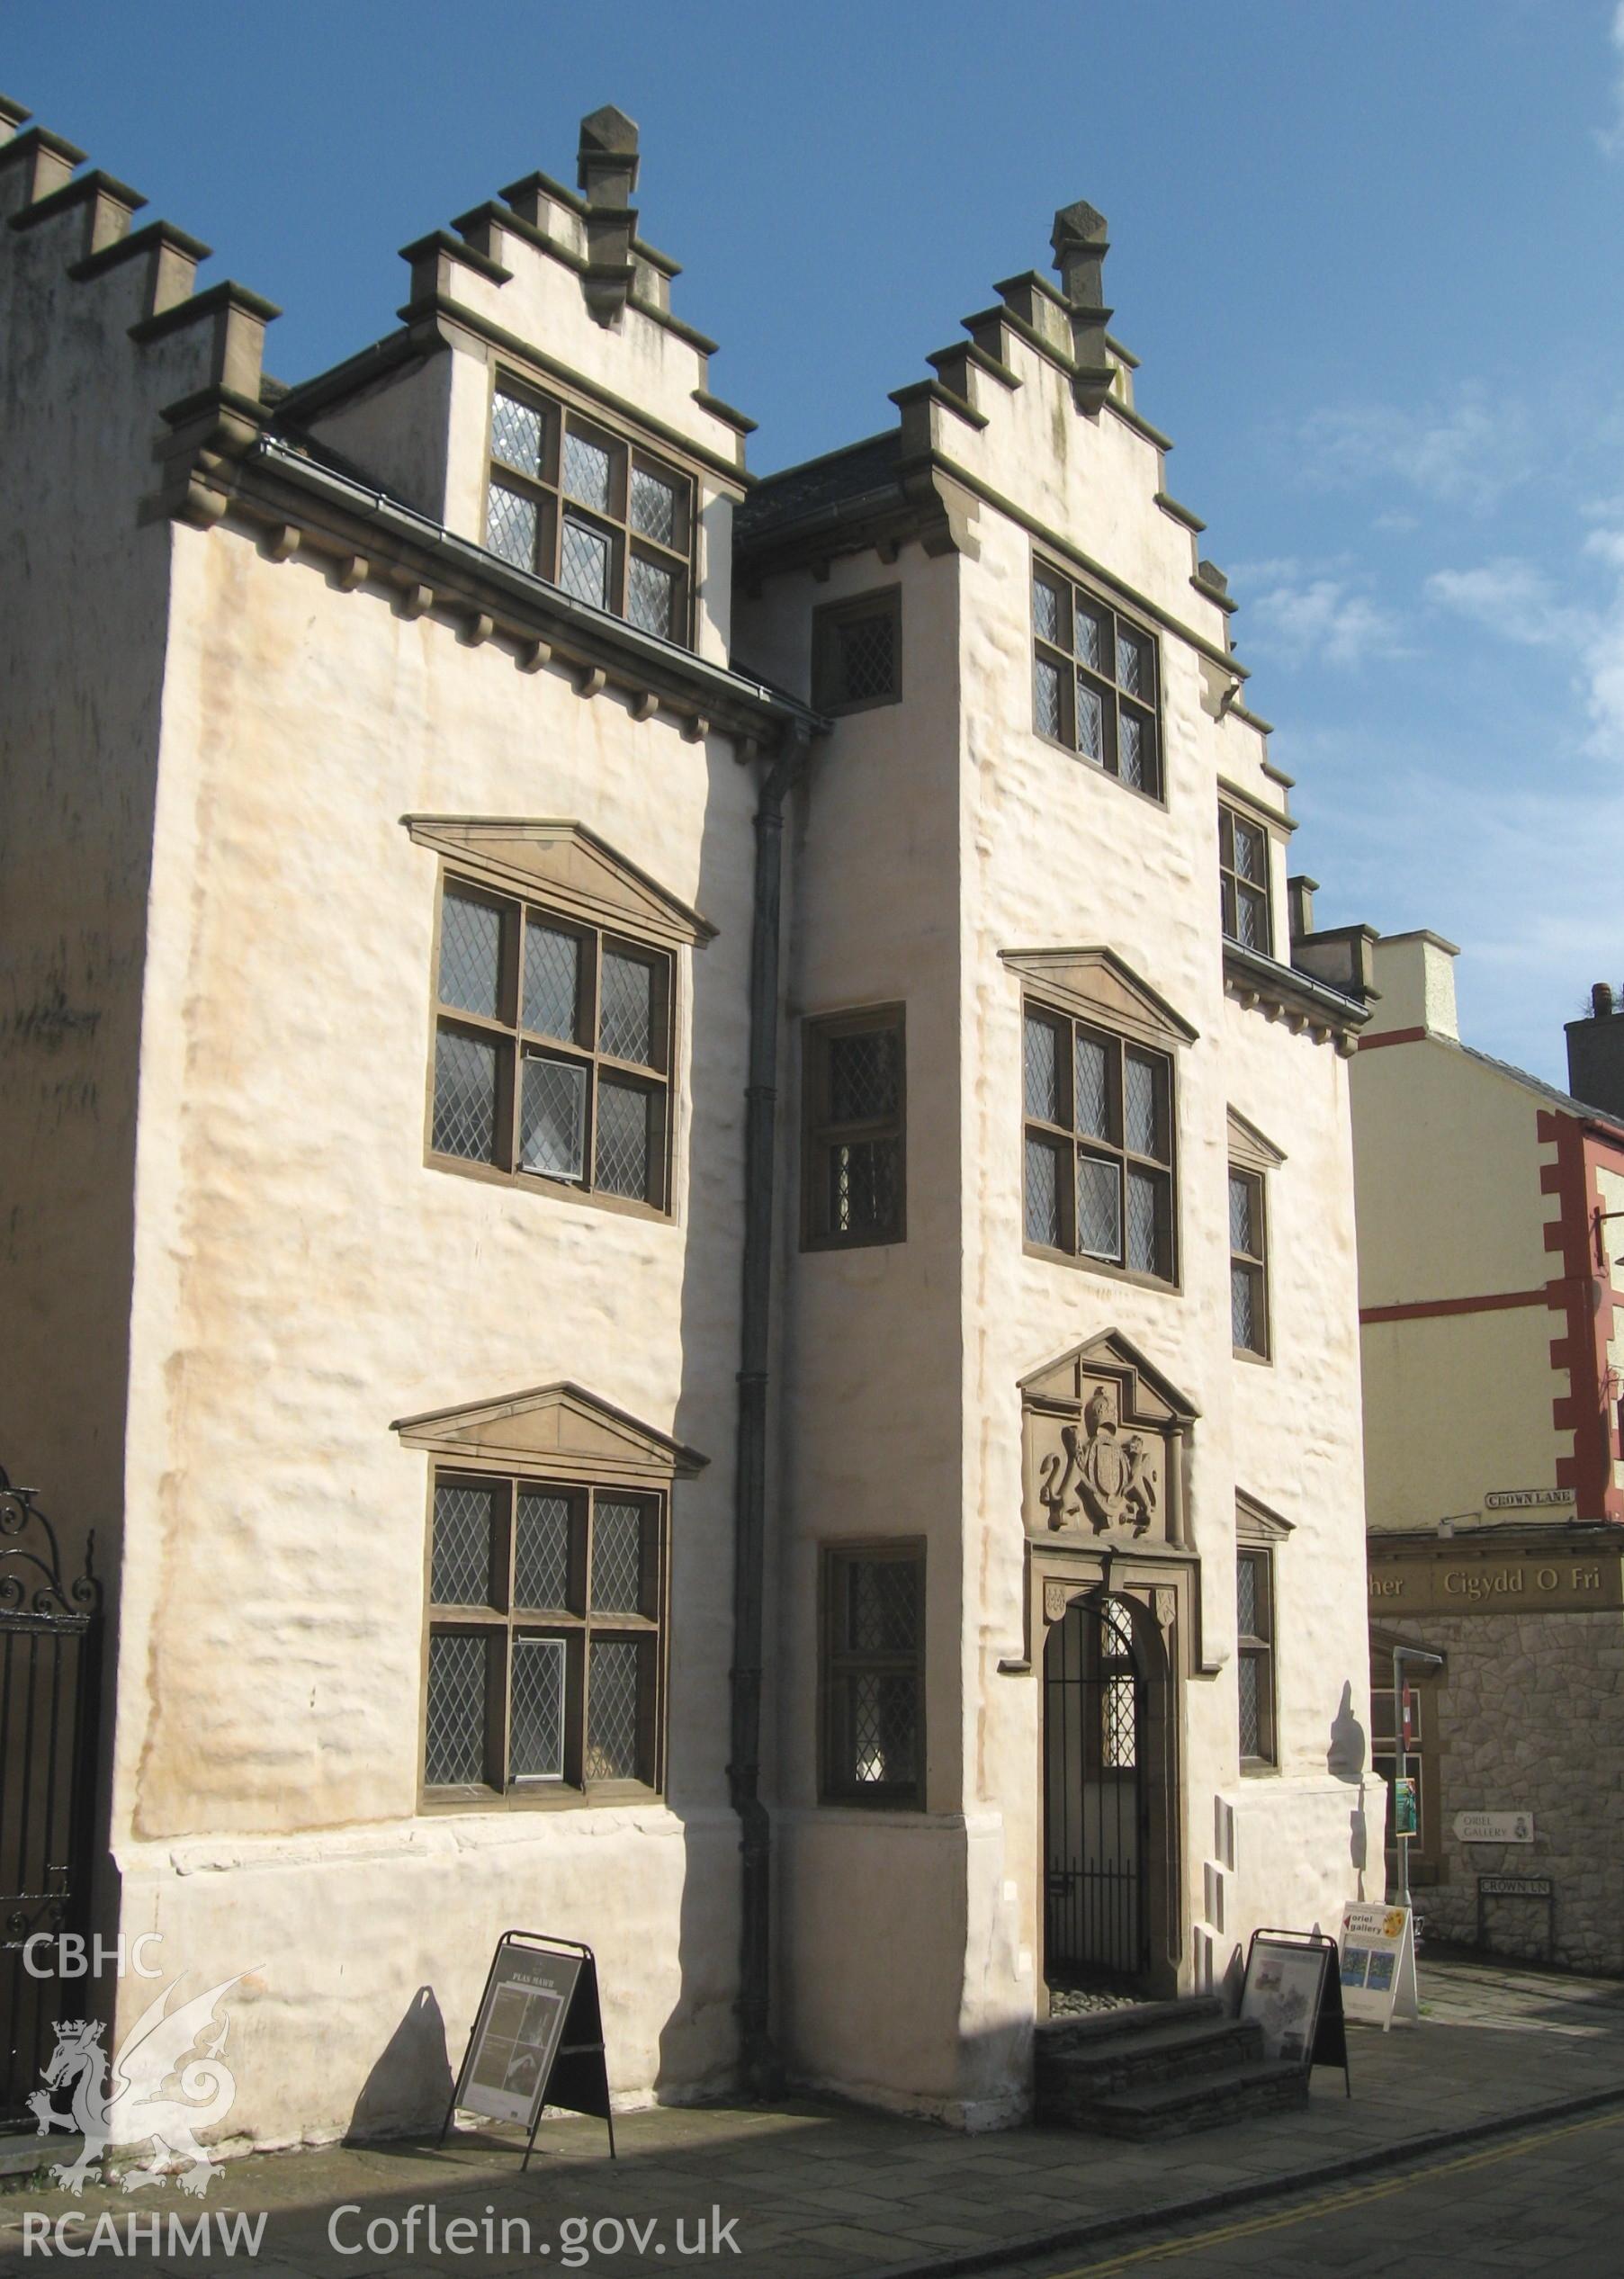 Colour photo showing Plas Mawr, Conwy, taken by Paul R. Davis and dated 11th May 2006.